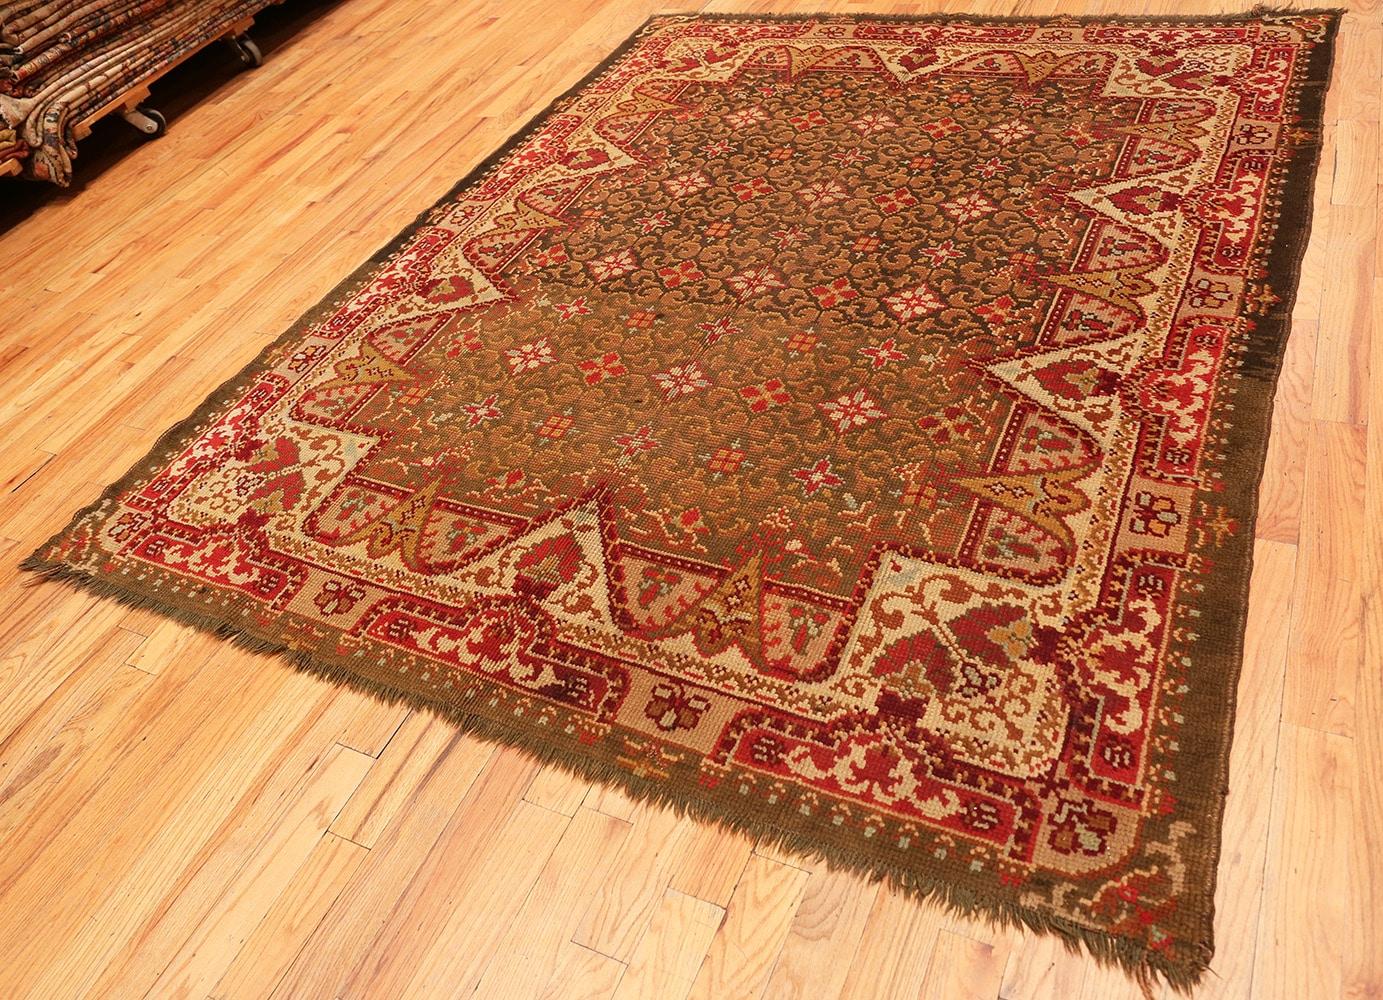 Hand-Knotted Antique Irish Rug. Size: 6 ft 9 in x 8 ft 6 in (2.06 m x 2.59 m)